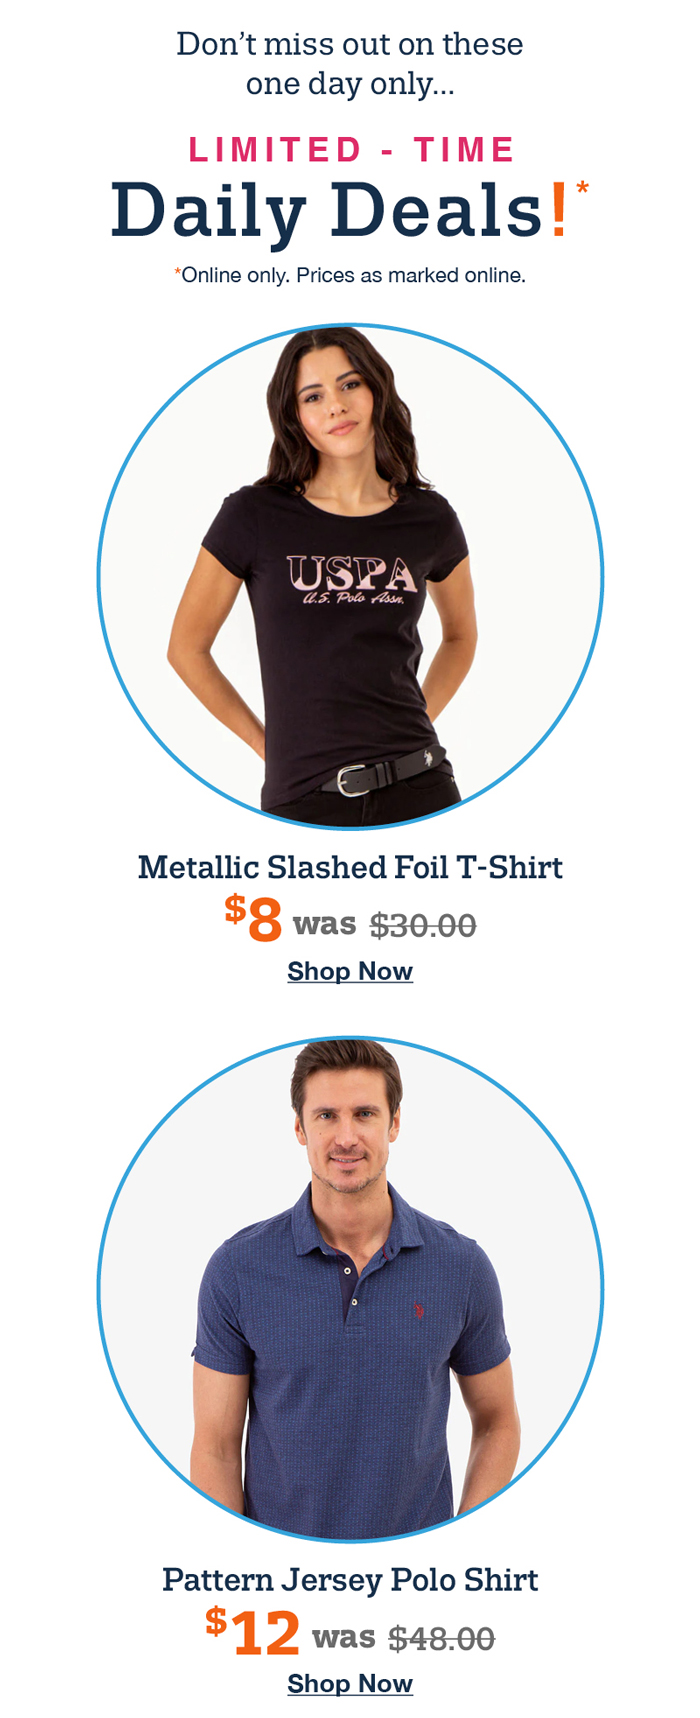 Don't miss out on these one day only... Limited time Daily Deals! Online only. Prices as marked online. Metallic Slashes Foil T-shirt $8 was $30.00 Pattern Jersey Polo Shirt $12 was $48.00 Shop now